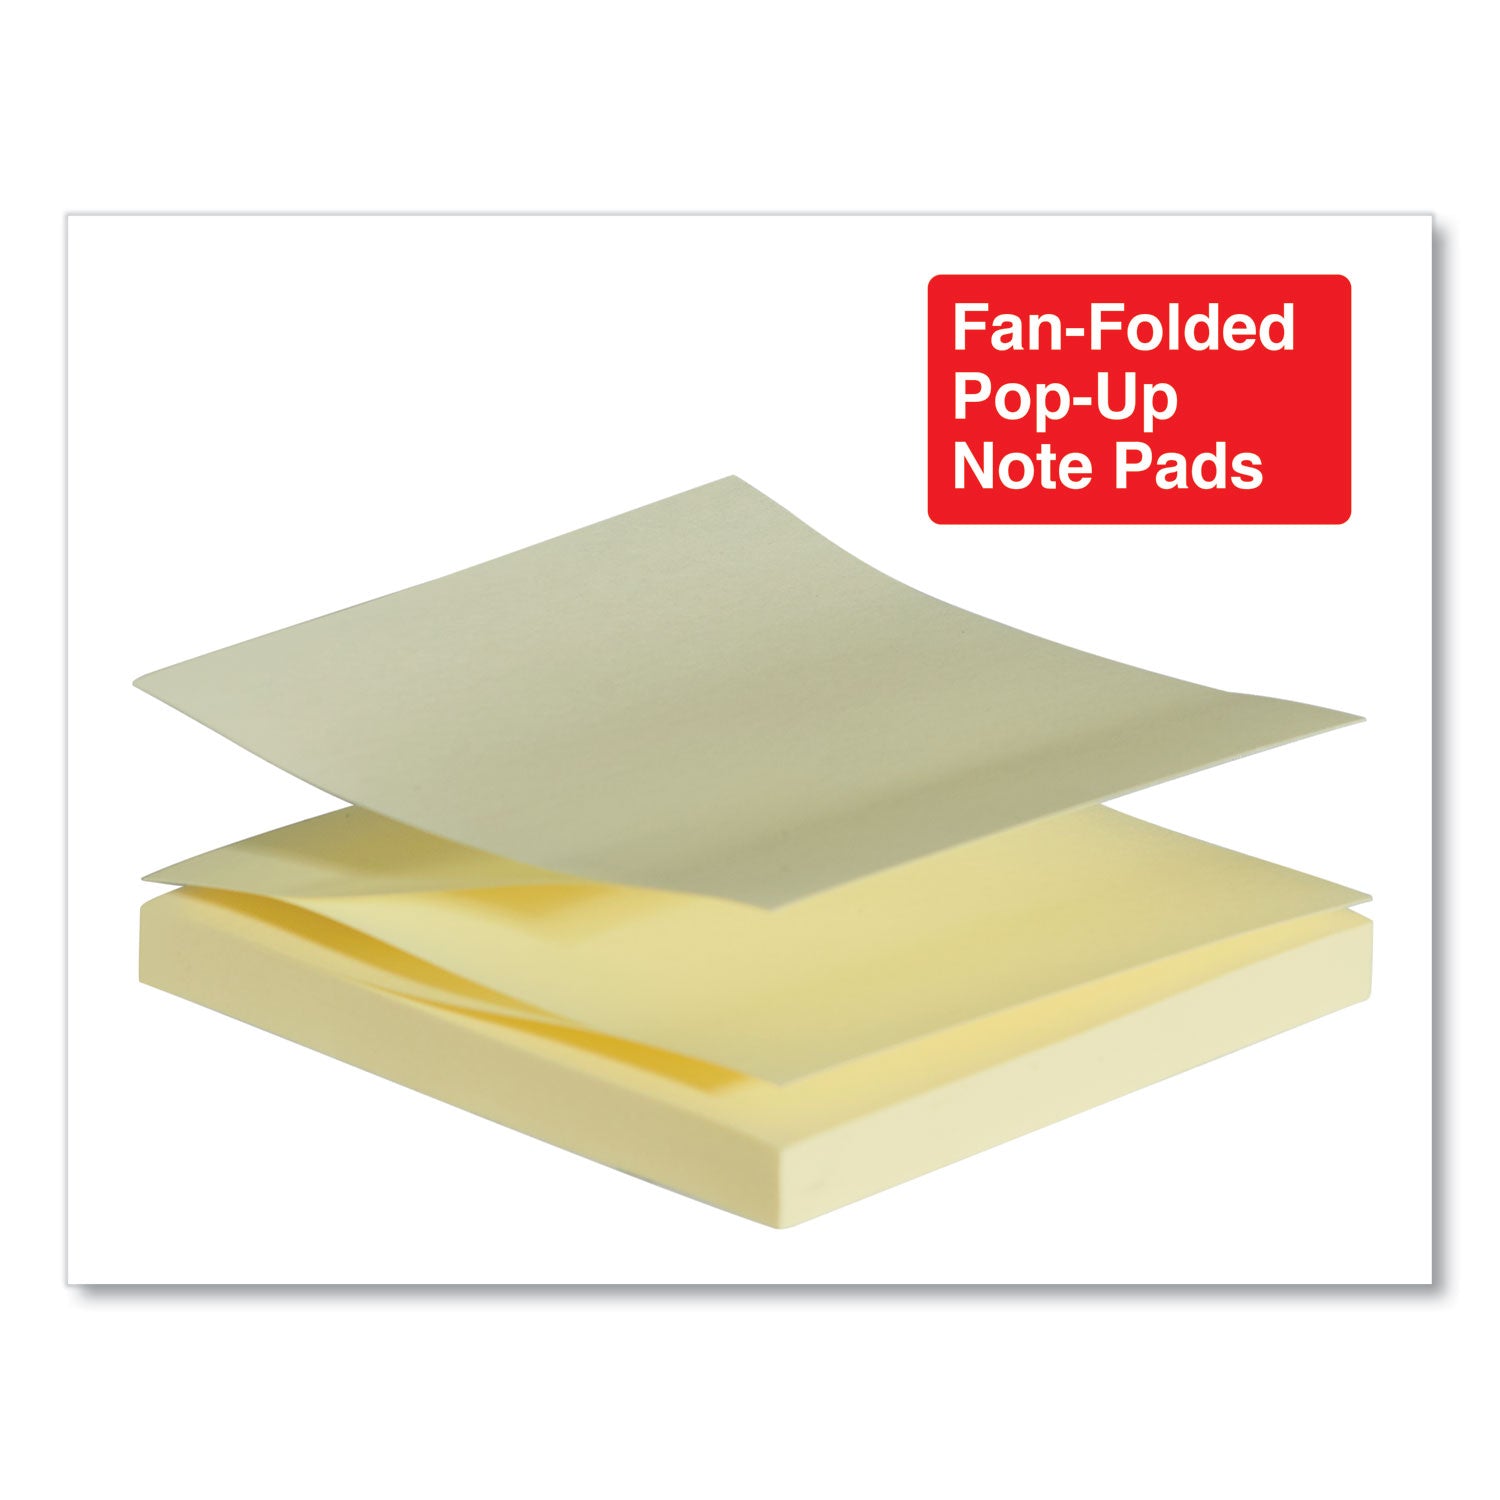 Fan-Folded Self-Stick Pop-Up Note Pads, 3" x 3", Yellow, 100 Sheets/Pad, 12 Pads/Pack - 